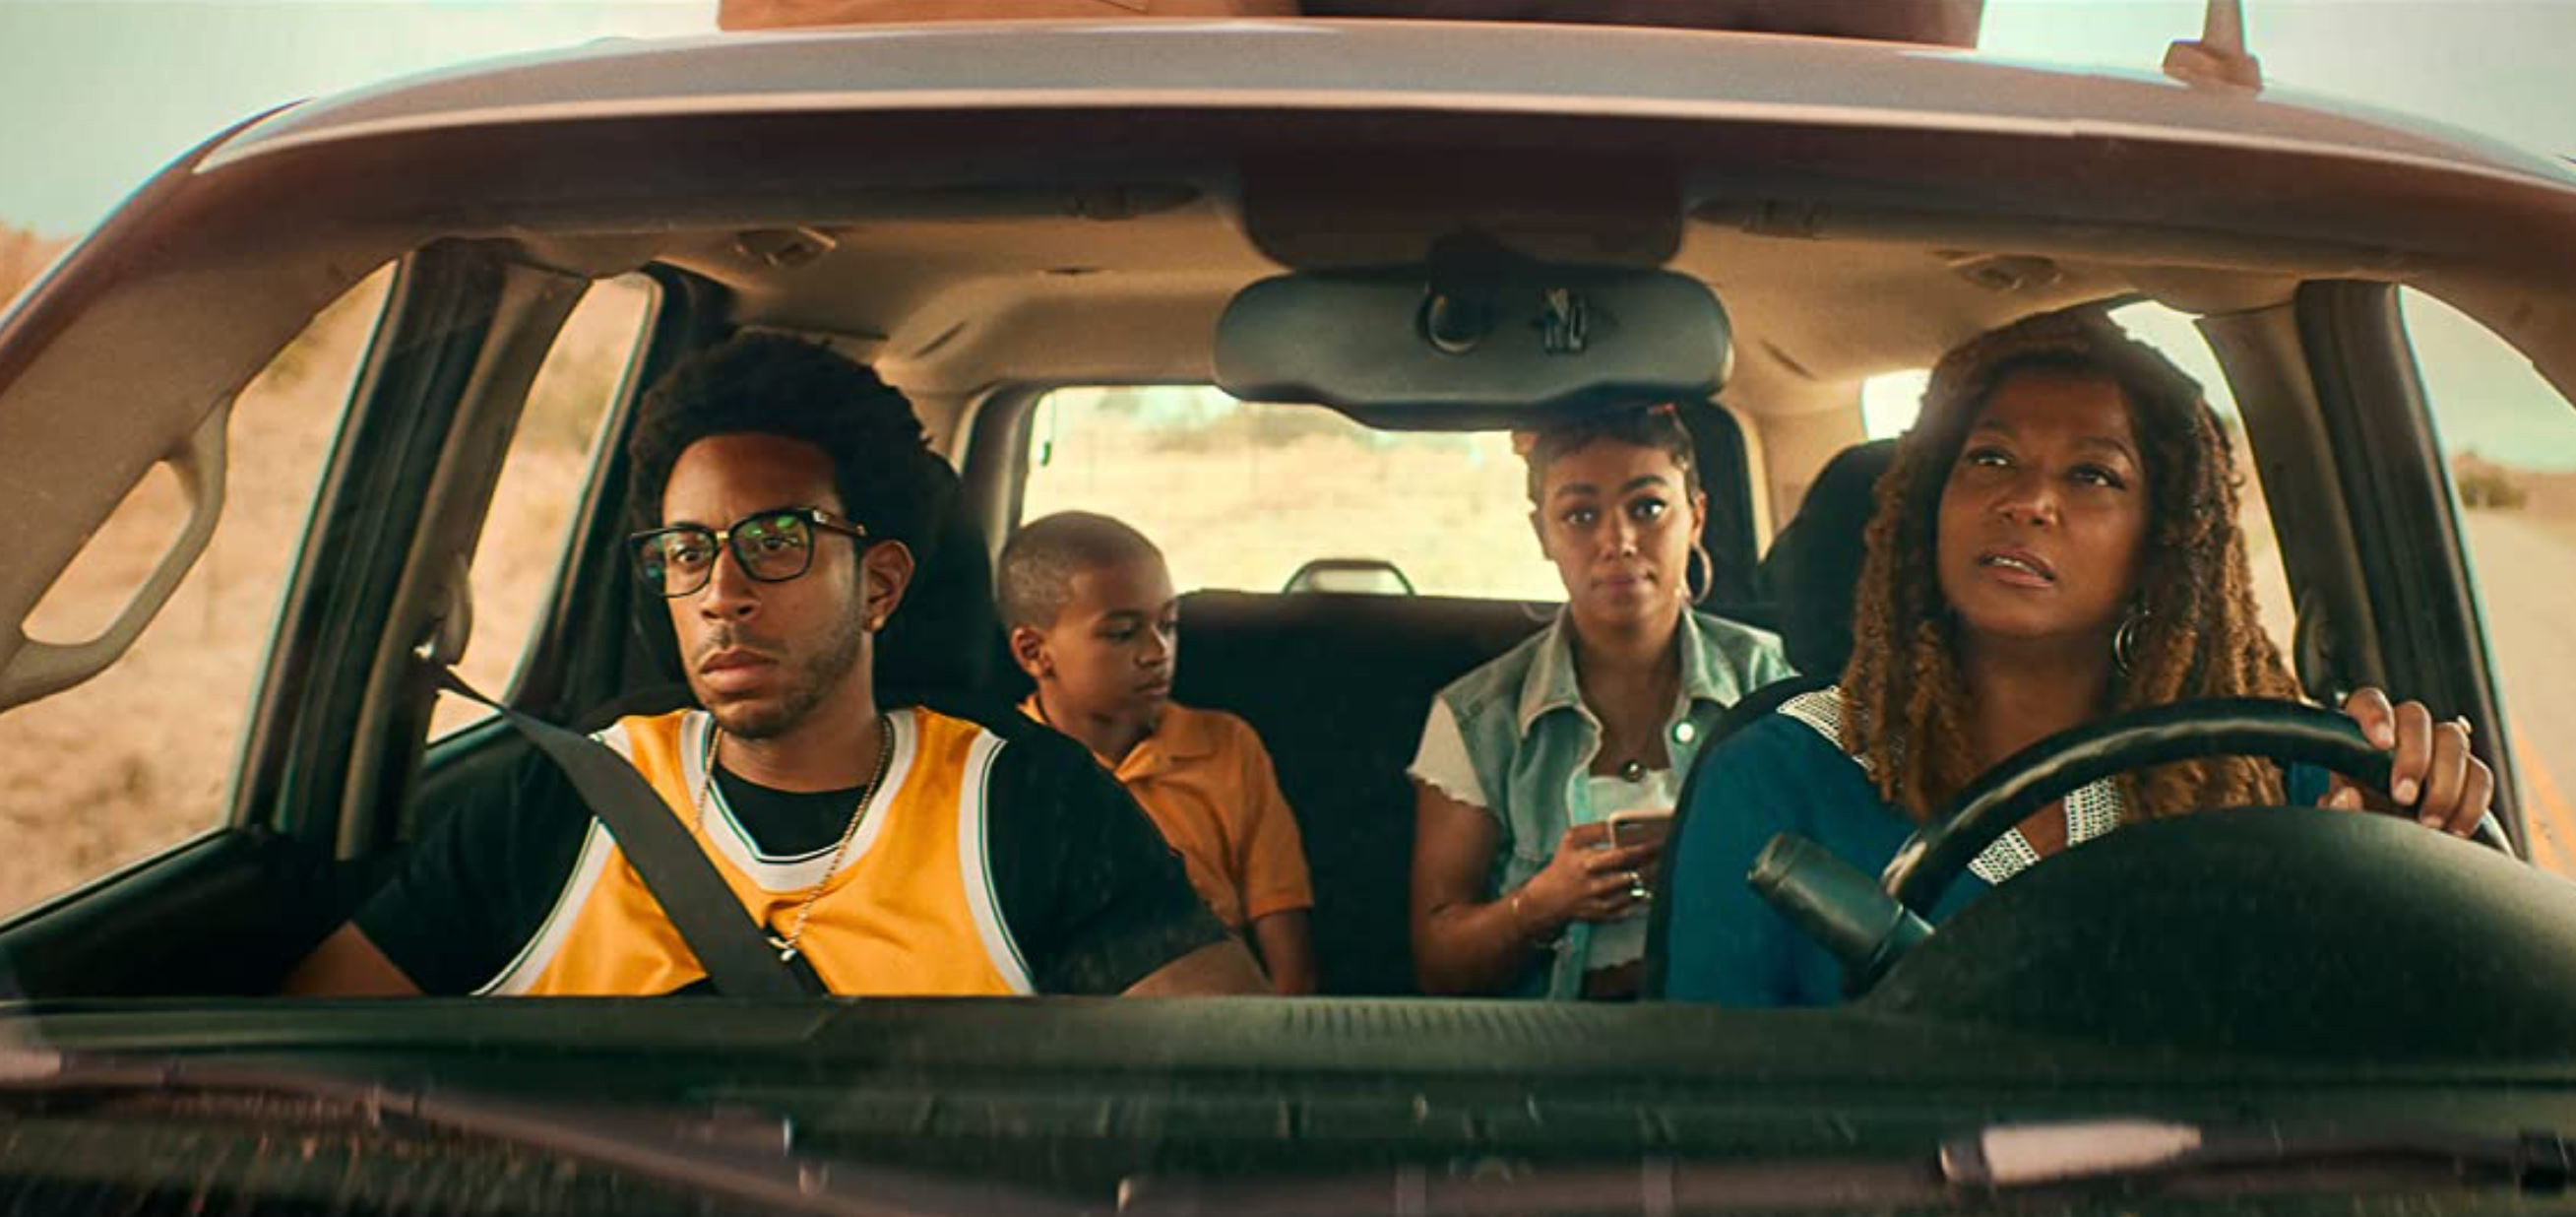 End of the Road Netflix Film Starring Ludacris and Queen Latifah